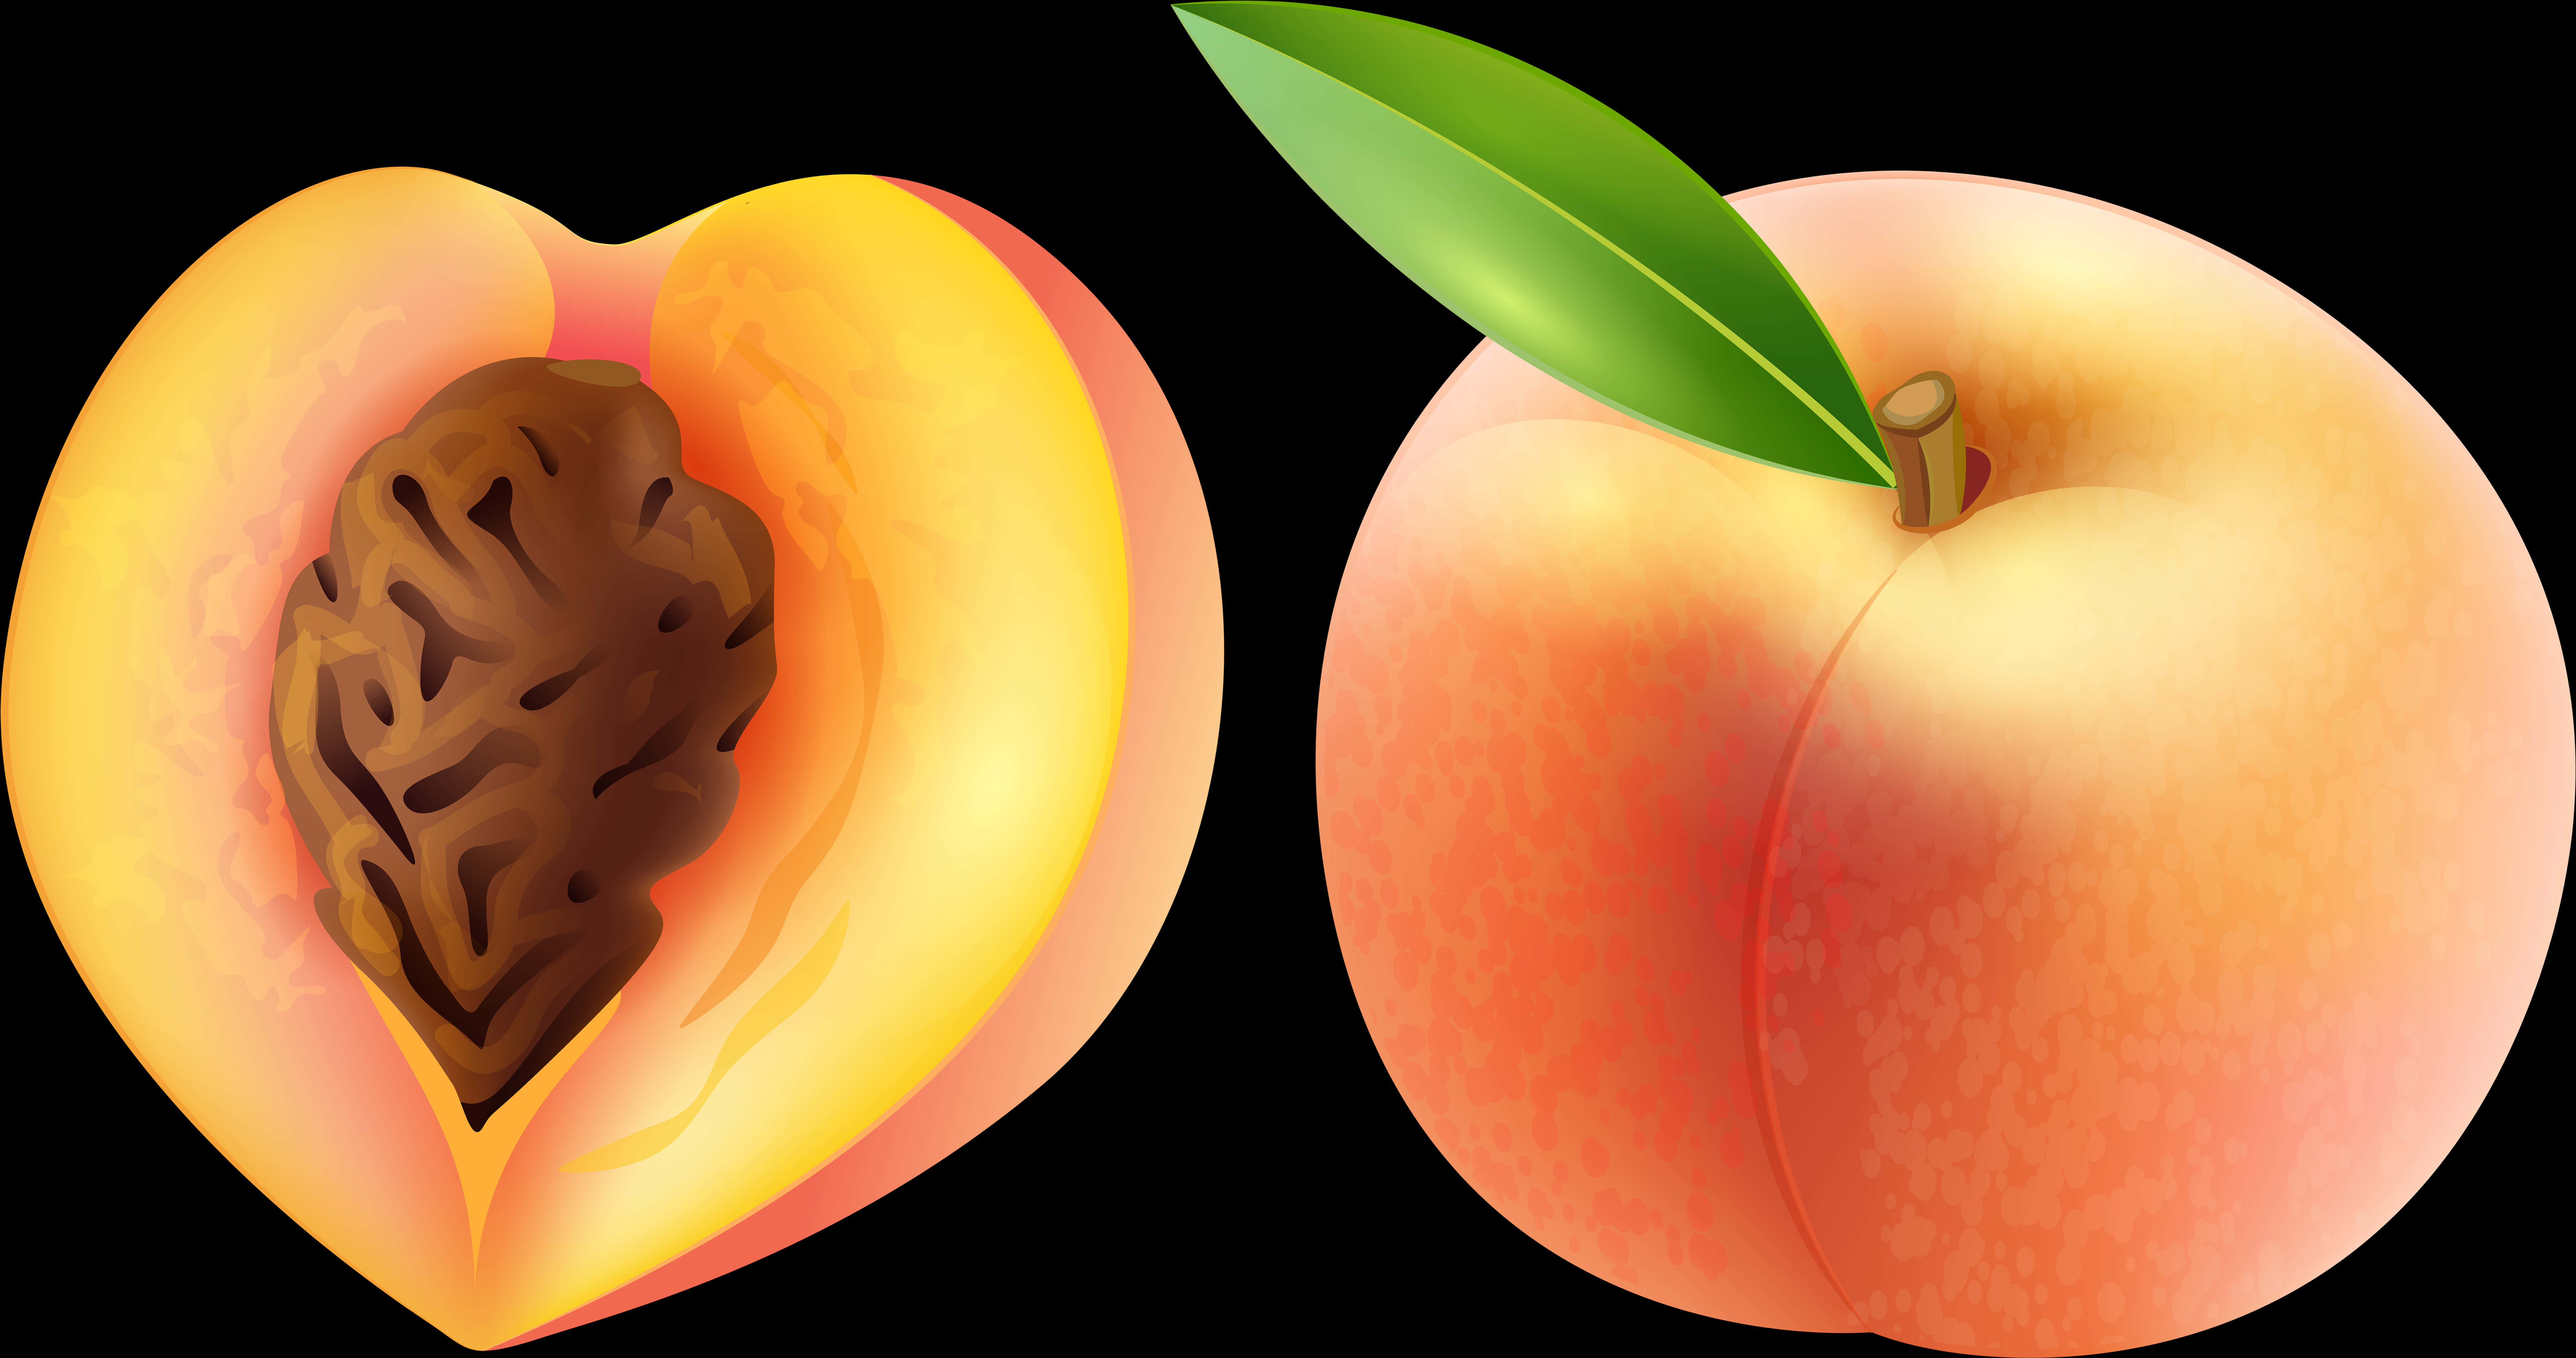 Wholeand Half Peach Illustration PNG image